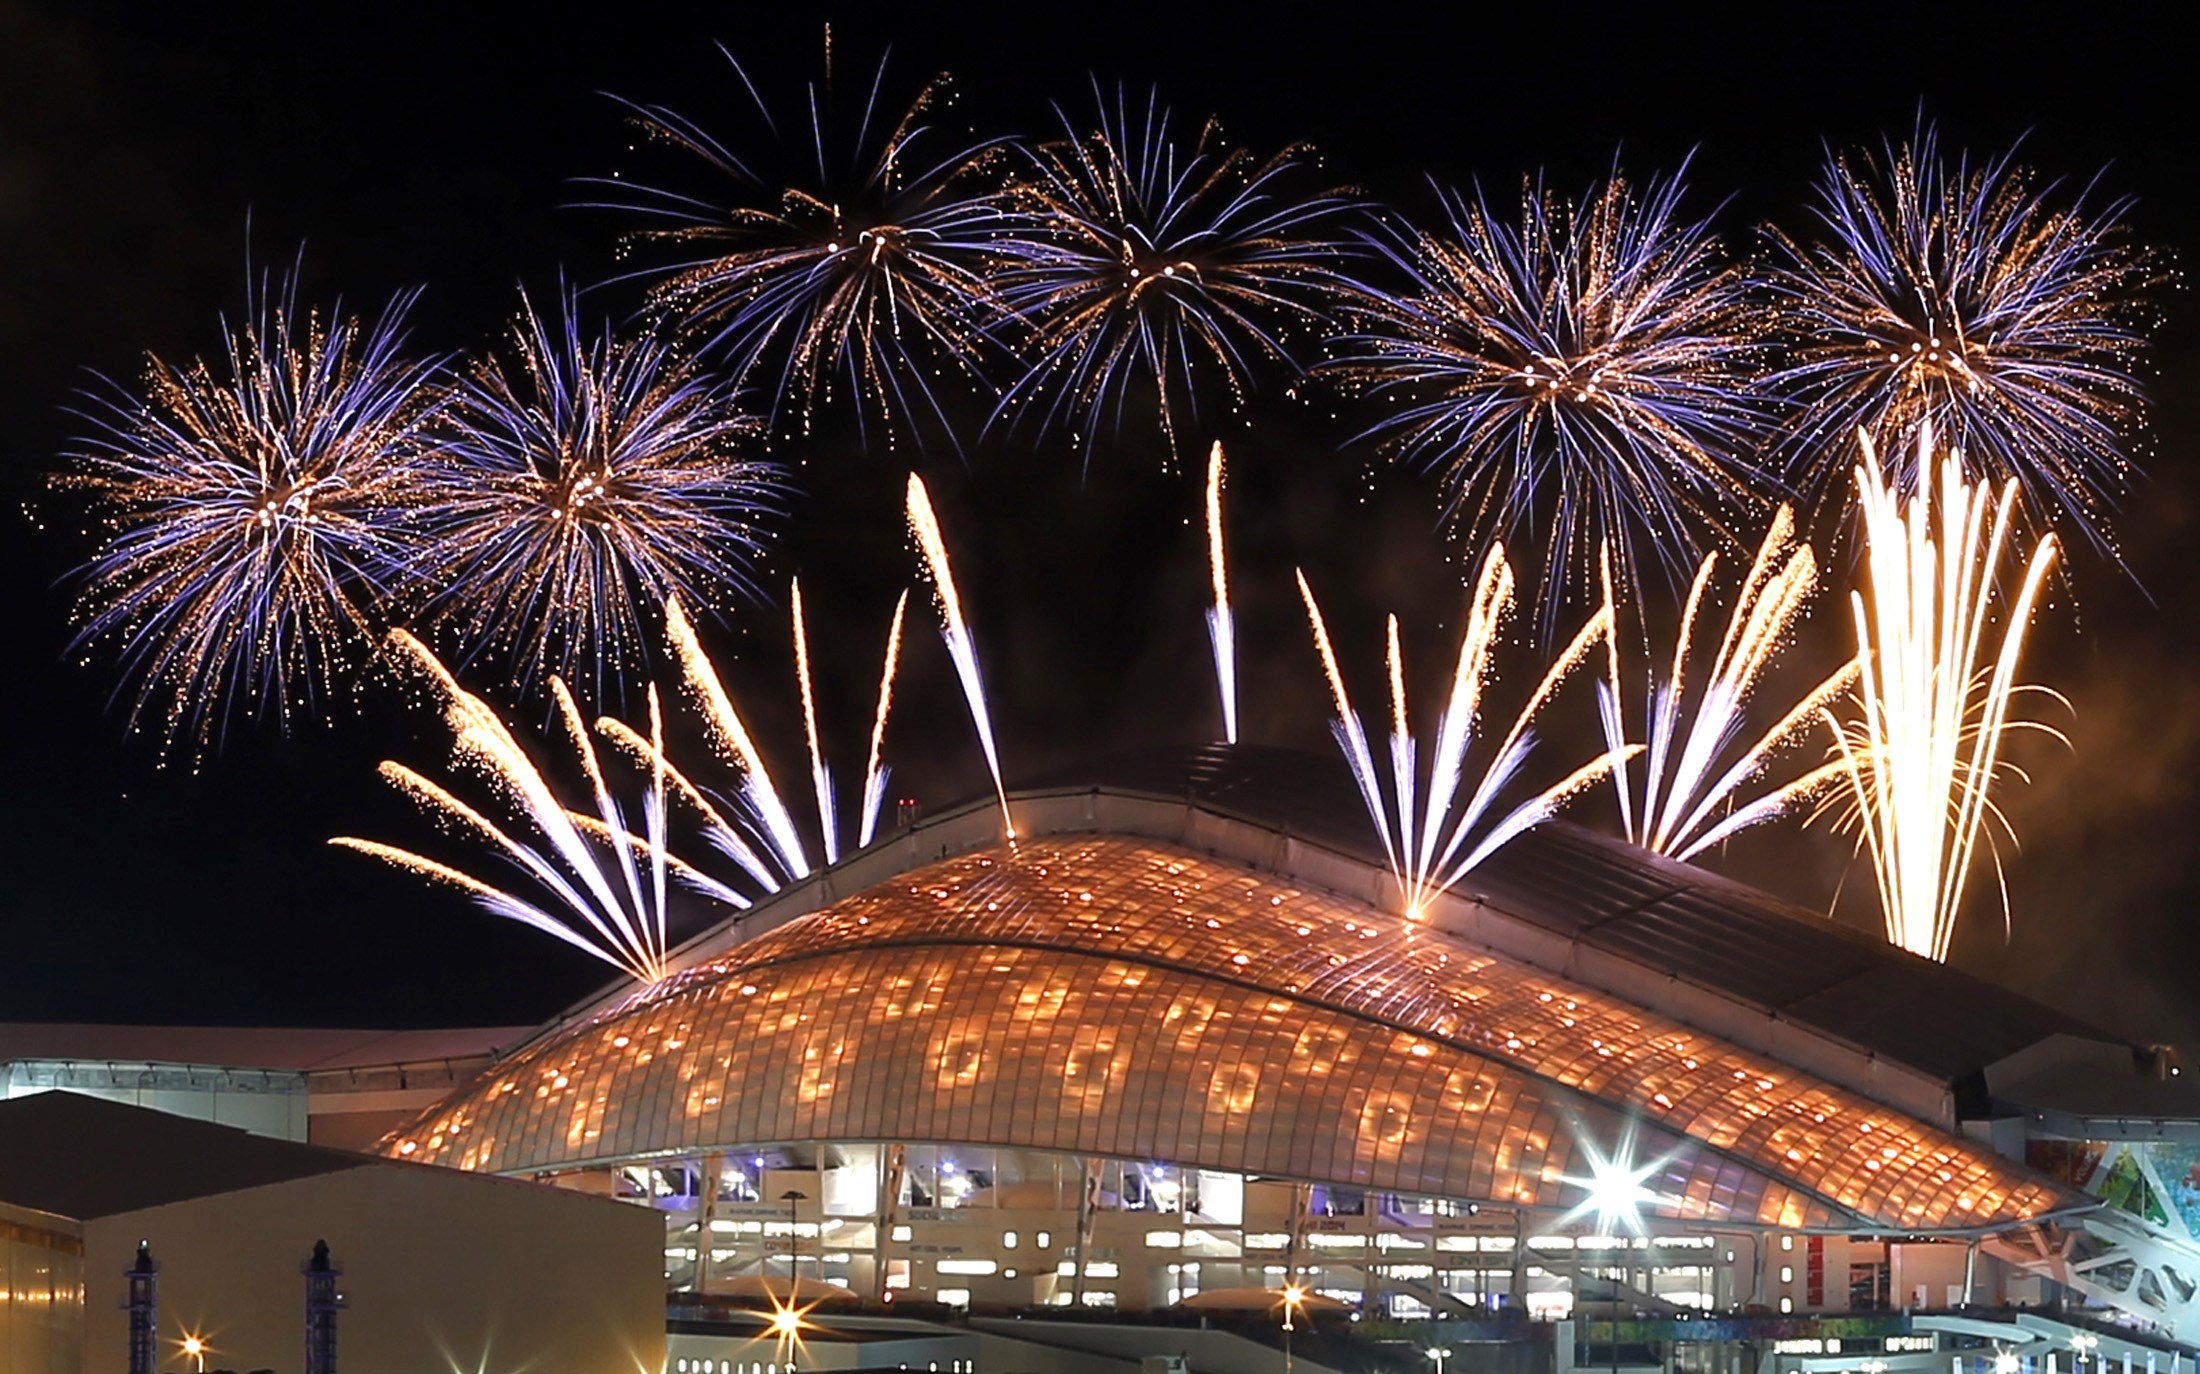 Fireworks over the Fisht Olympic Stadium at the Olympic Park during a rehearsal of the opening ceremony in Sochi, on Feb. 4, 2014. (Alexander Demianchuk / Reuters)